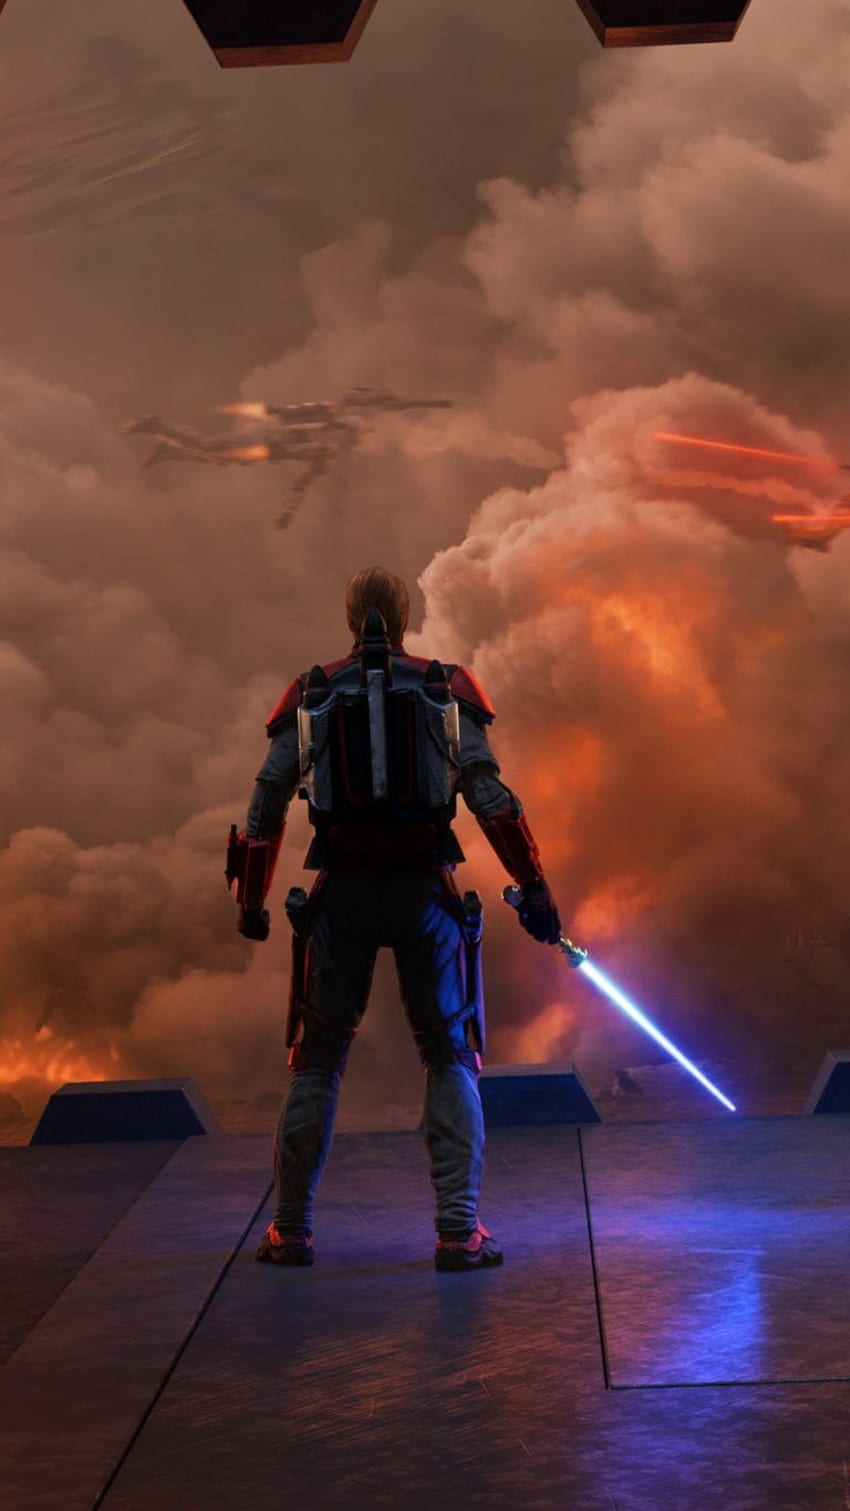 A man standing in front of some clouds - Star Wars